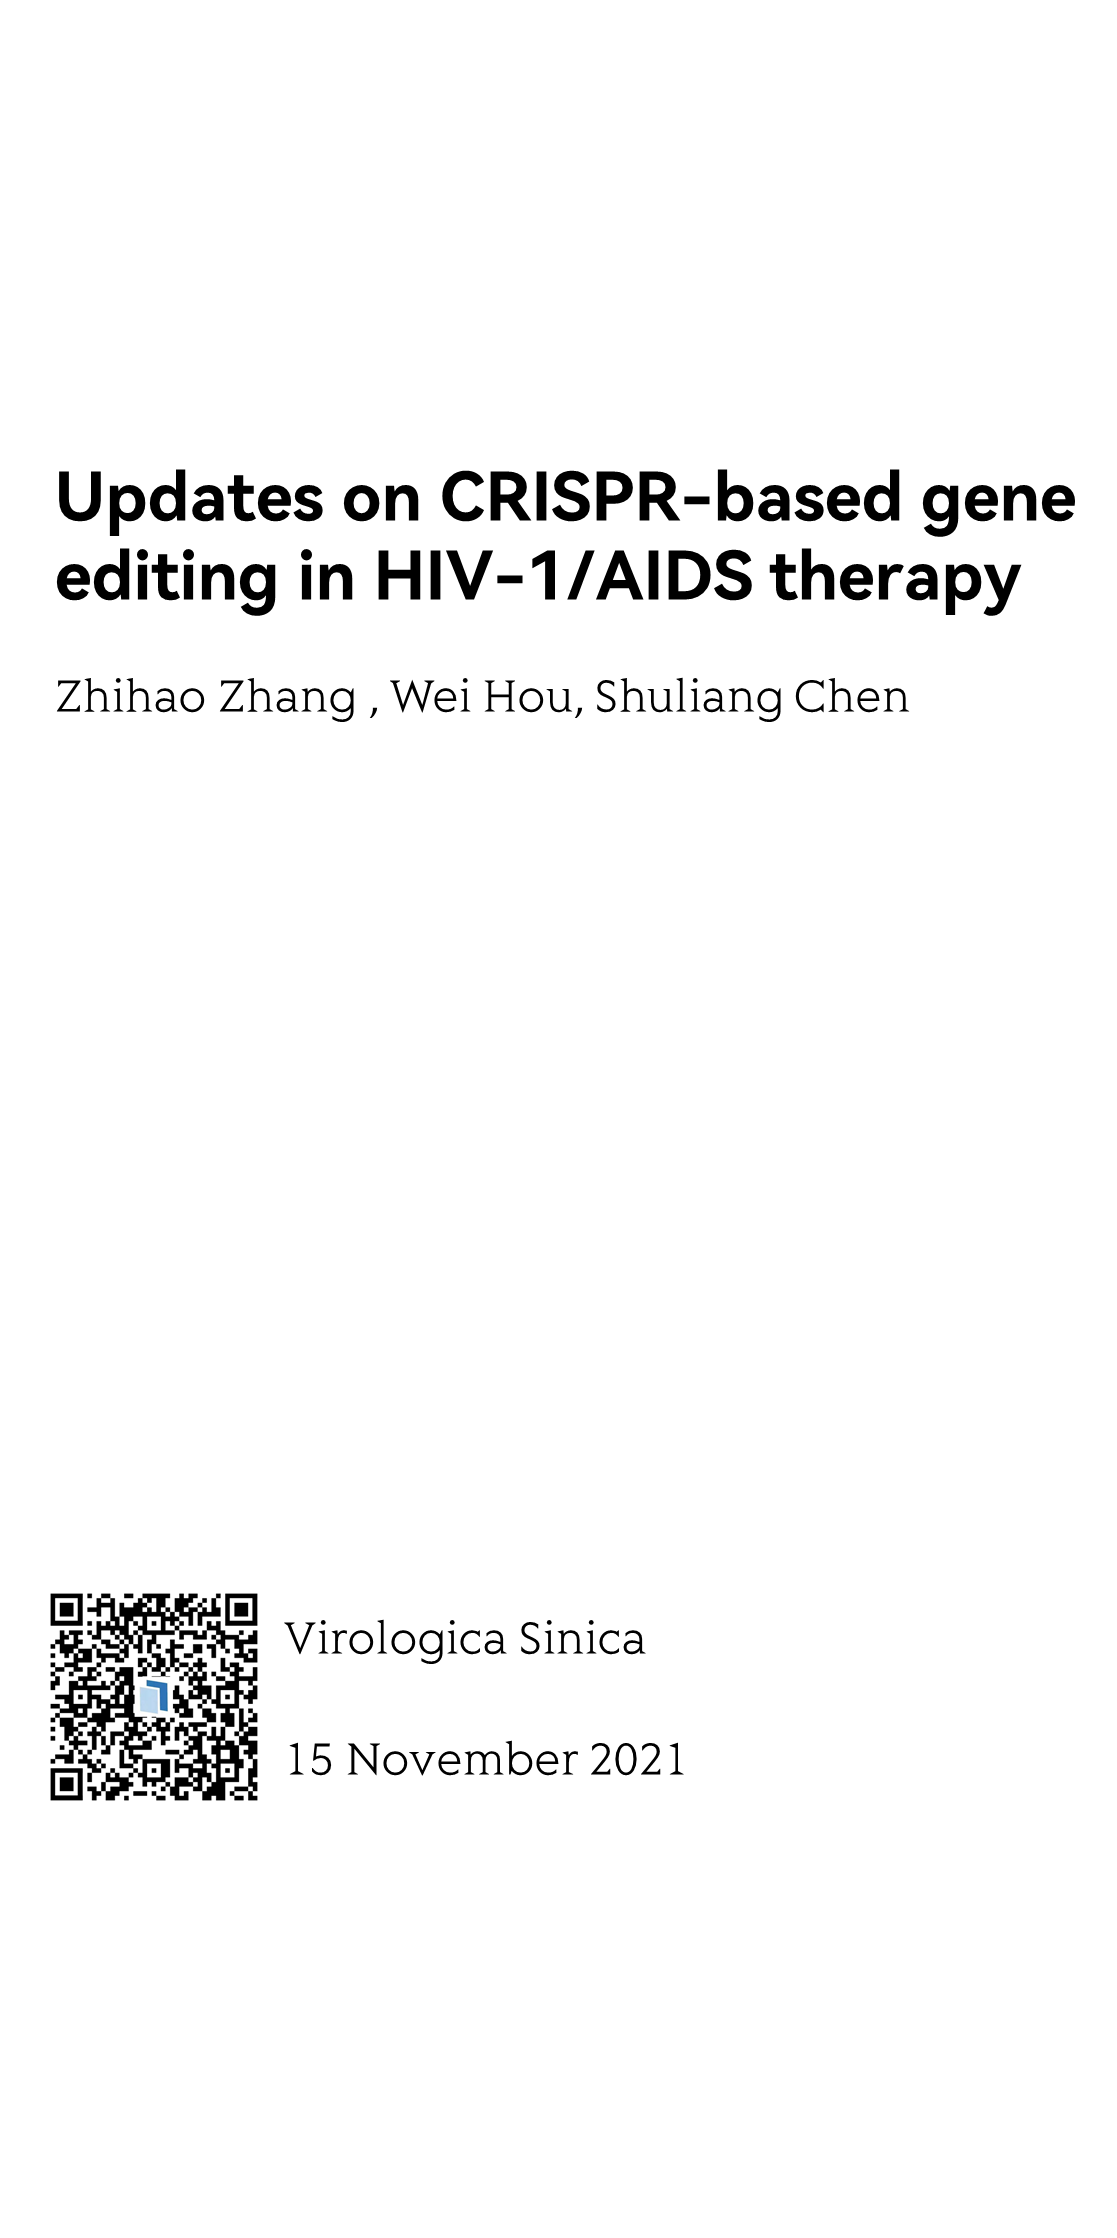 Updates on CRISPR-based gene editing in HIV-1/AIDS therapy_1